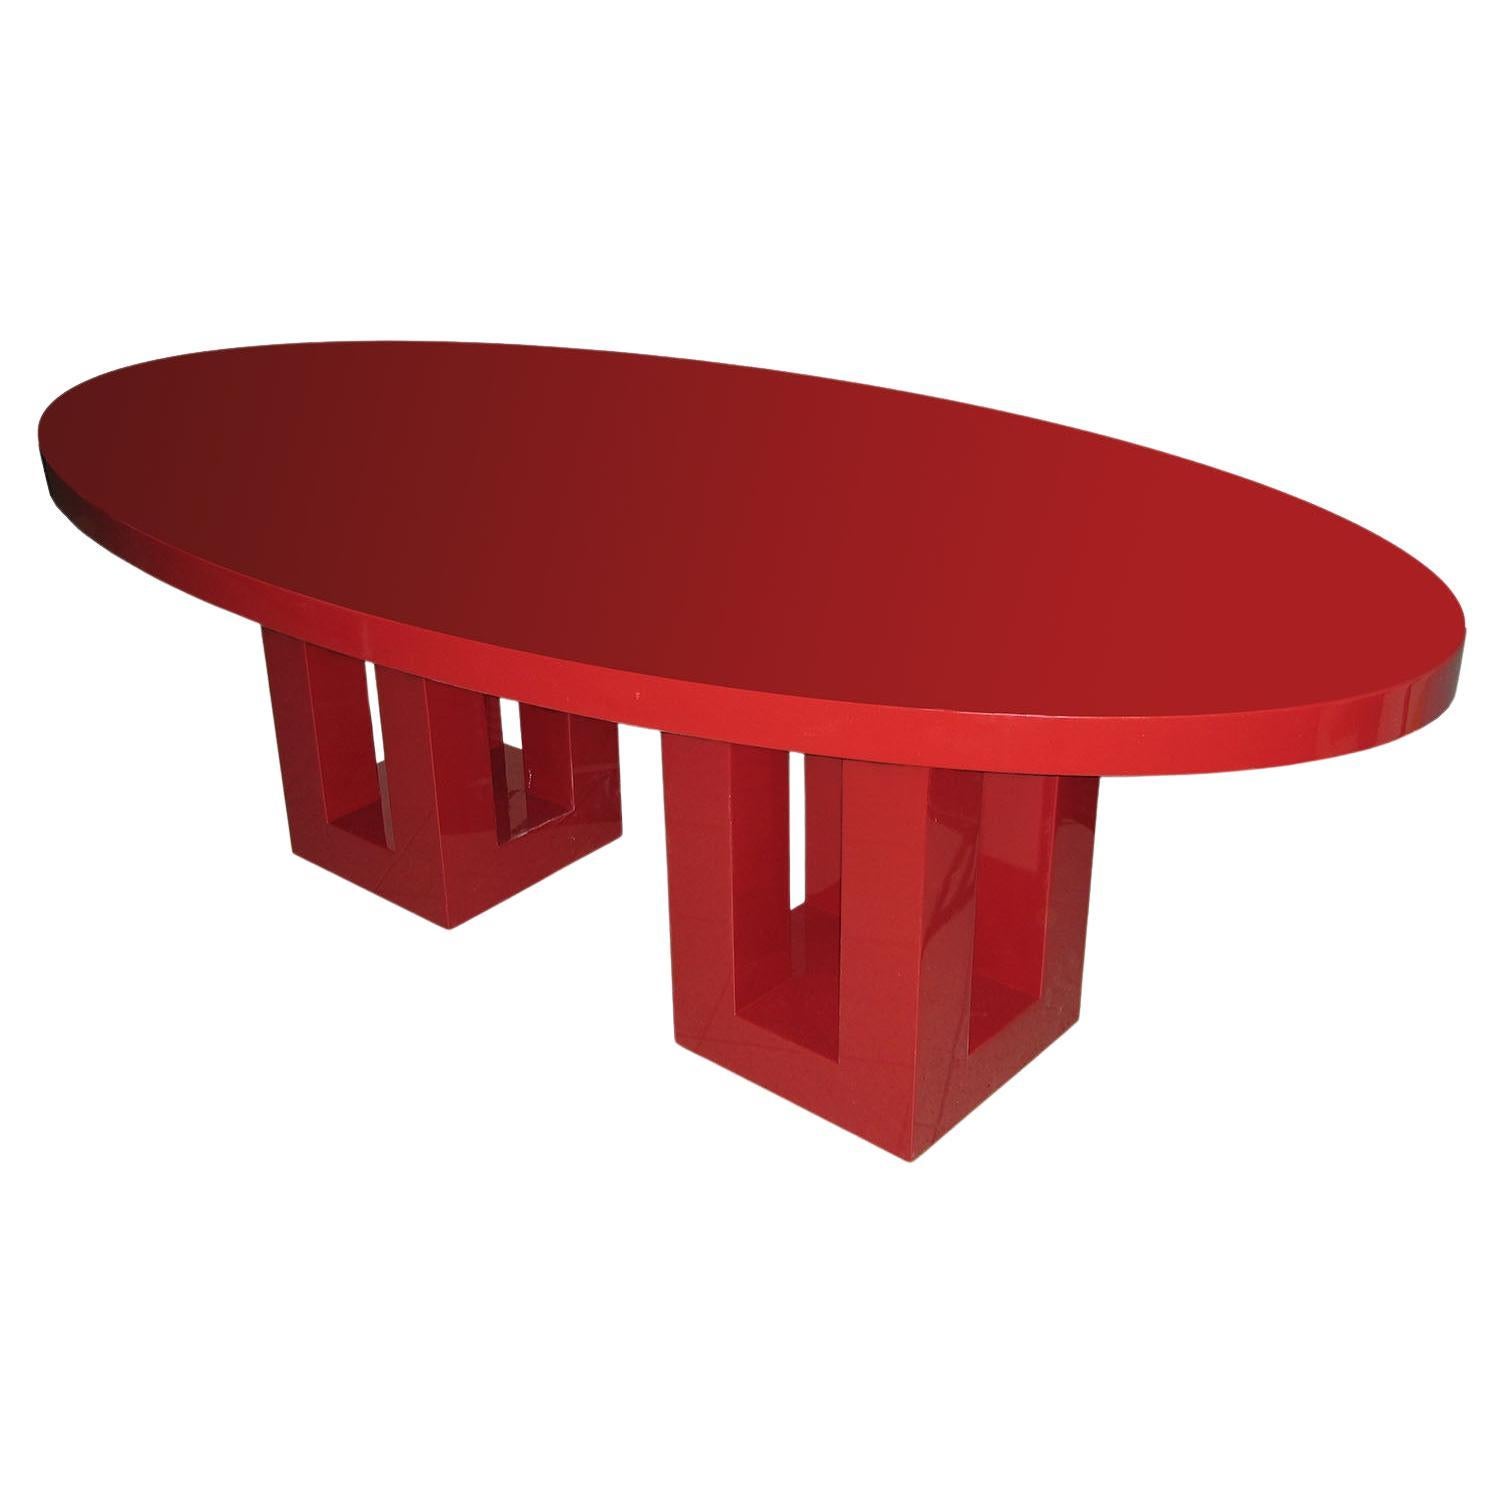 Large Red Lacquer Oval Dinning Table. 8 Feet, Francois Champsaur, France 1990s For Sale